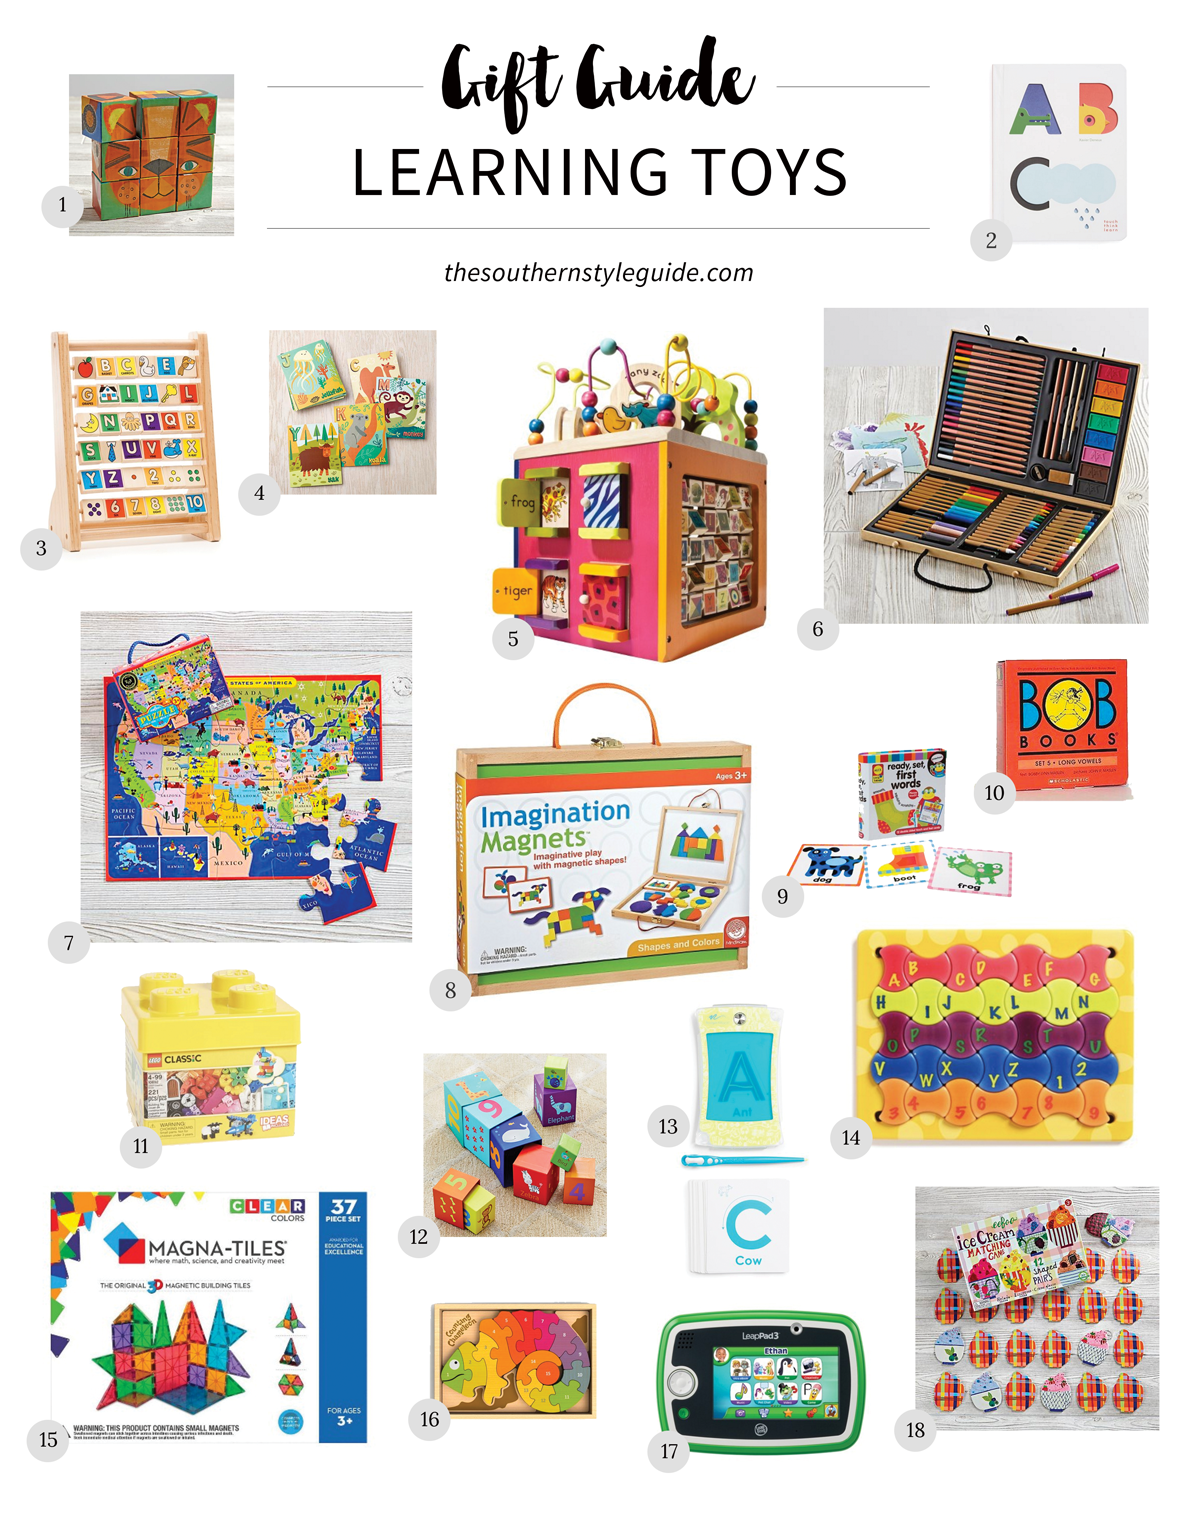 gift guide, learning toys, gifts for kids, gifts for boys, gifts for girls, learning toys for christmas, puzzles, art toys, educational toys, educational gifts, christmas, boys christmas gifts, girls christmas gifts, nordstrom, land of nod, target